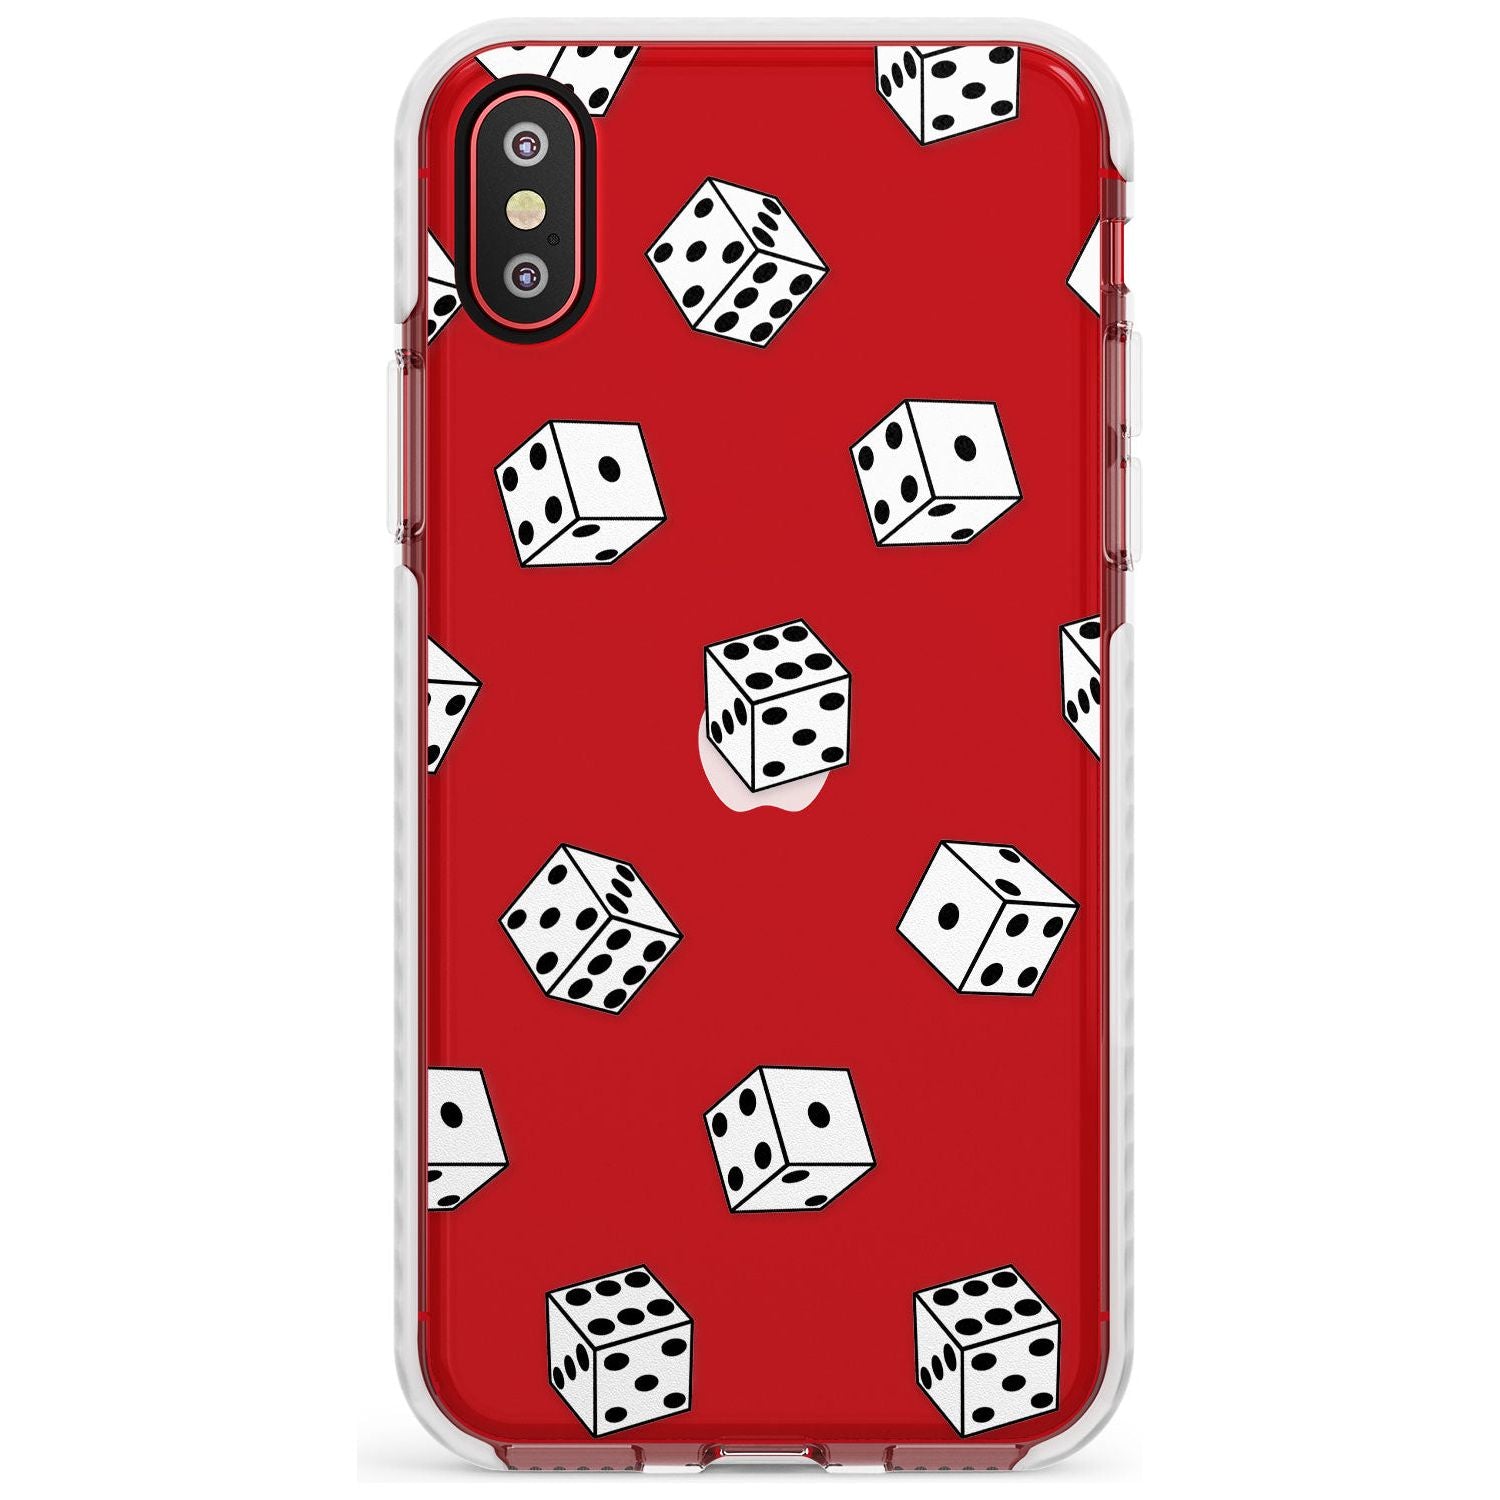 Clear Dice Pattern Impact Phone Case for iPhone X XS Max XR